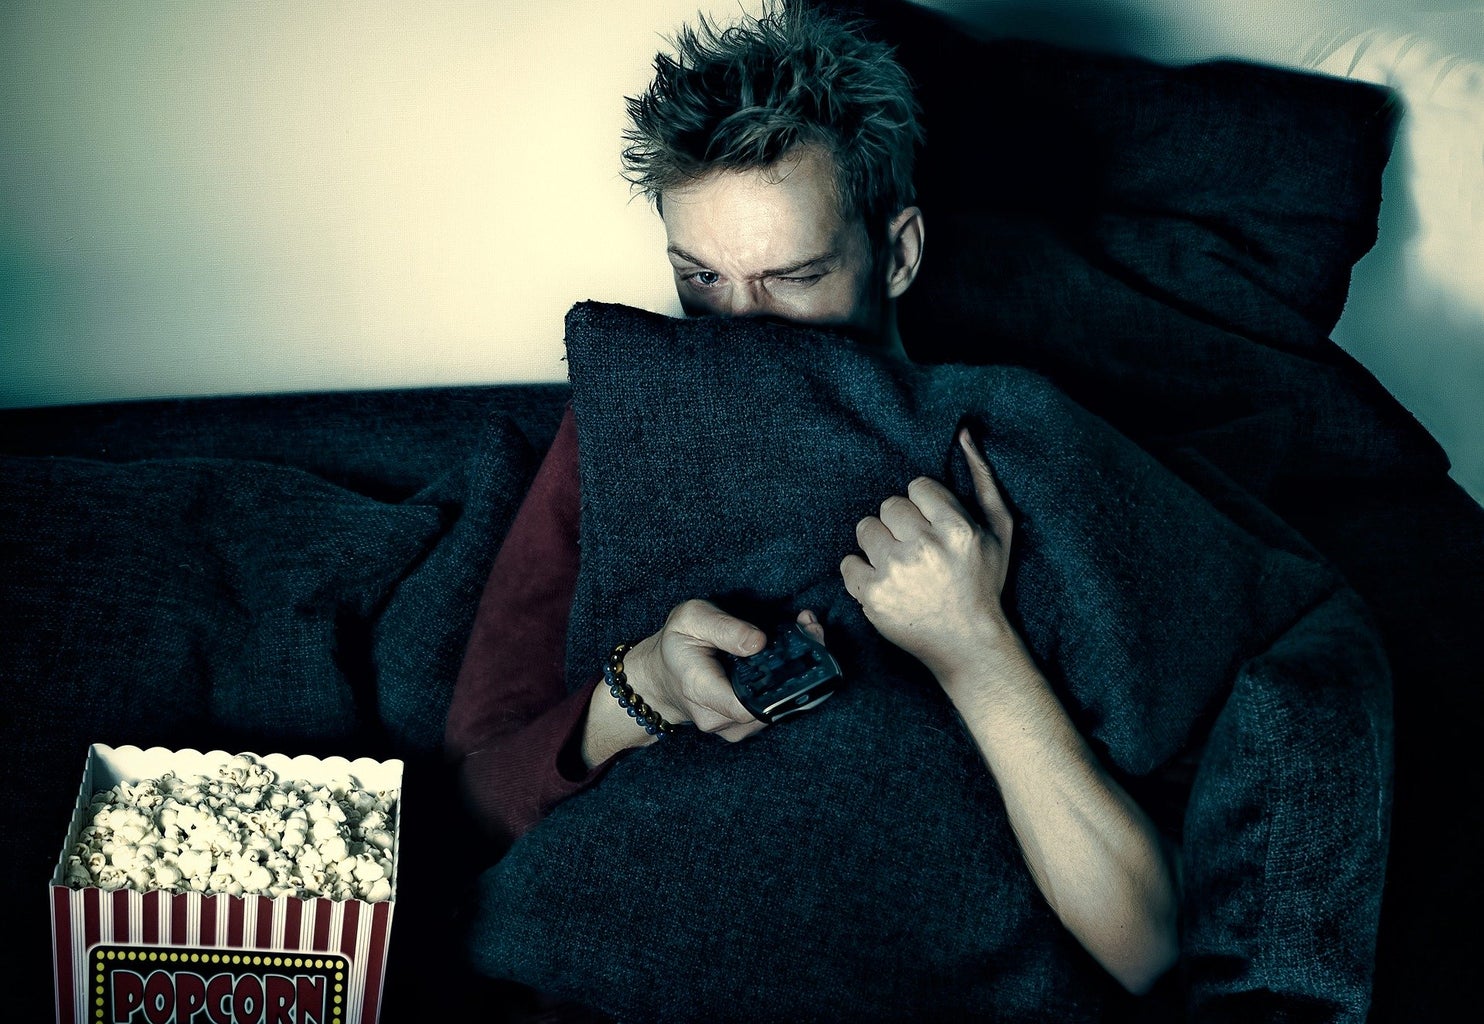 A man is sitting on a couch, next to popcorn in the dark, hiding behind a pillow